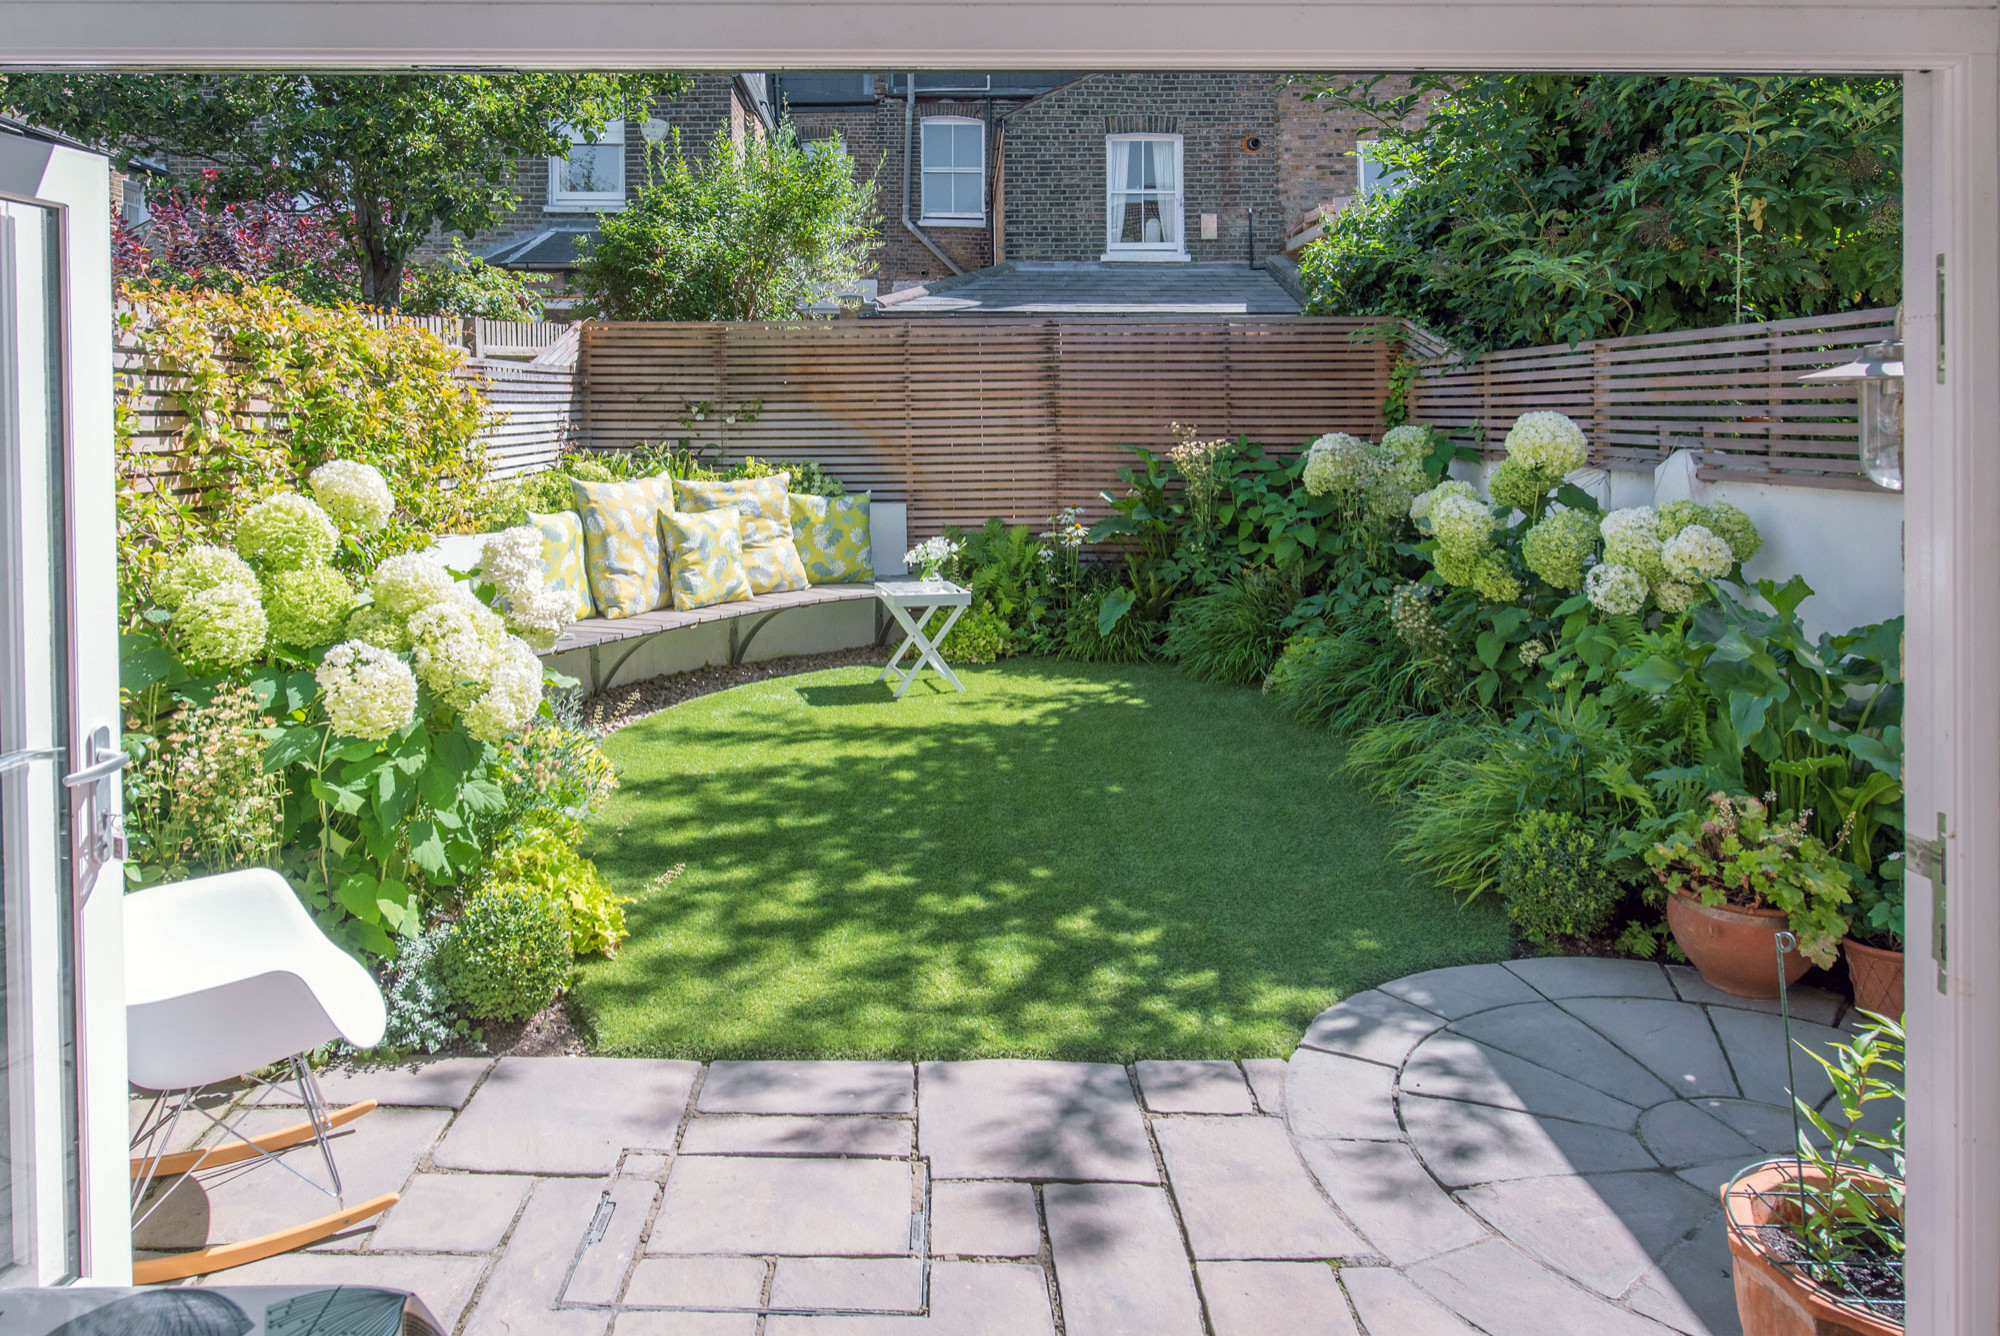 Sunny backyard garden with blooming hydrangeas and patio.